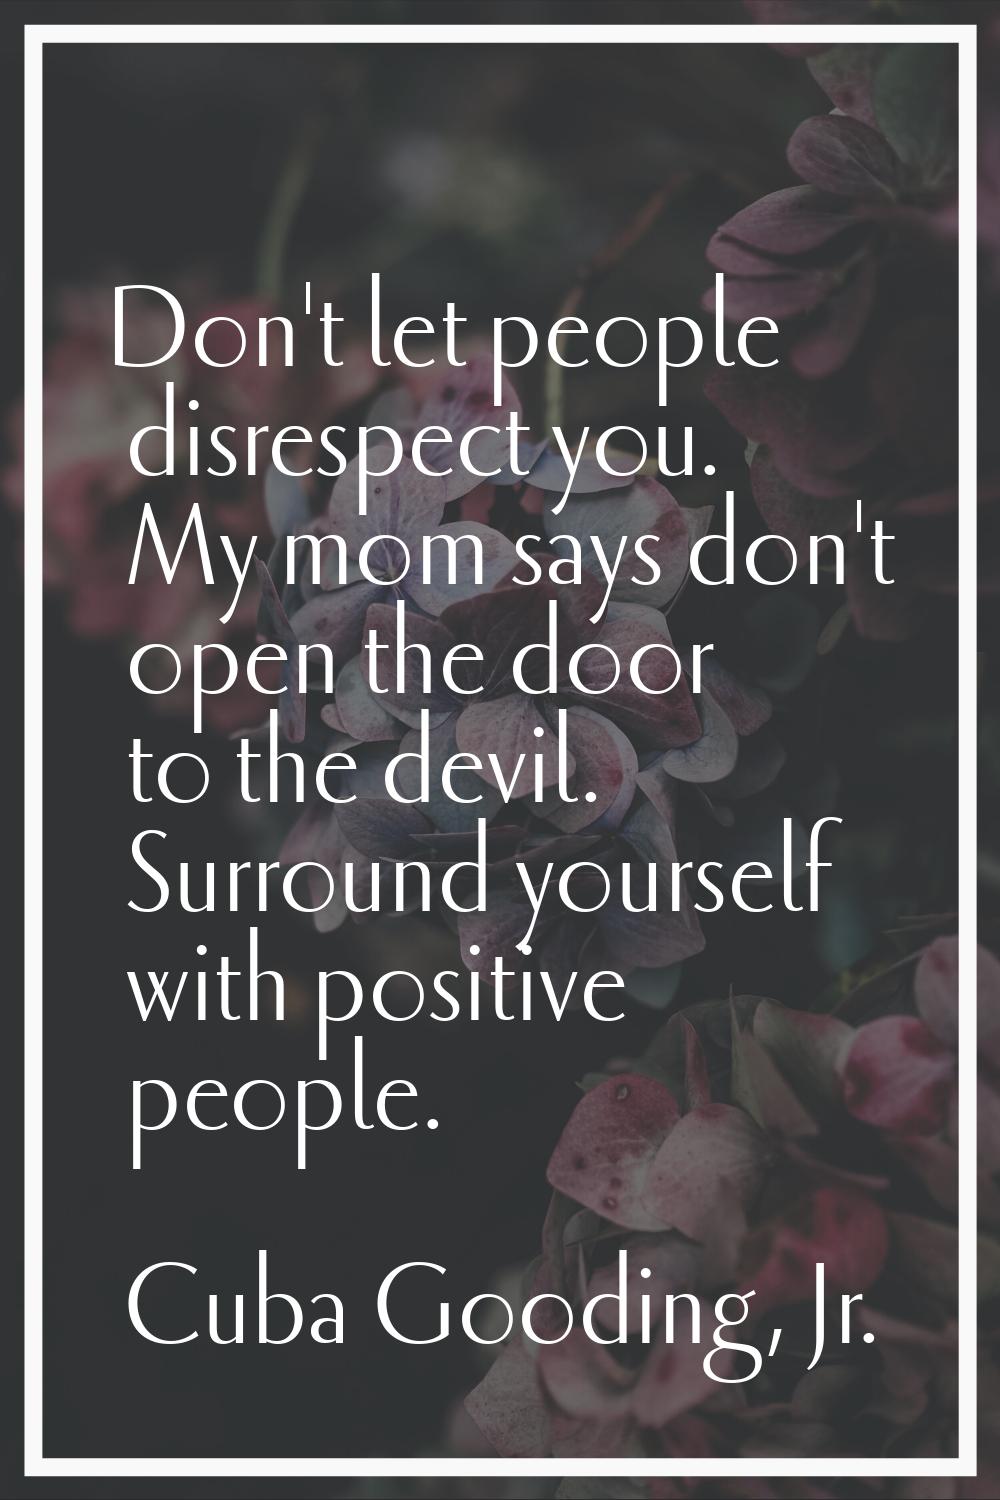 Don't let people disrespect you. My mom says don't open the door to the devil. Surround yourself wi